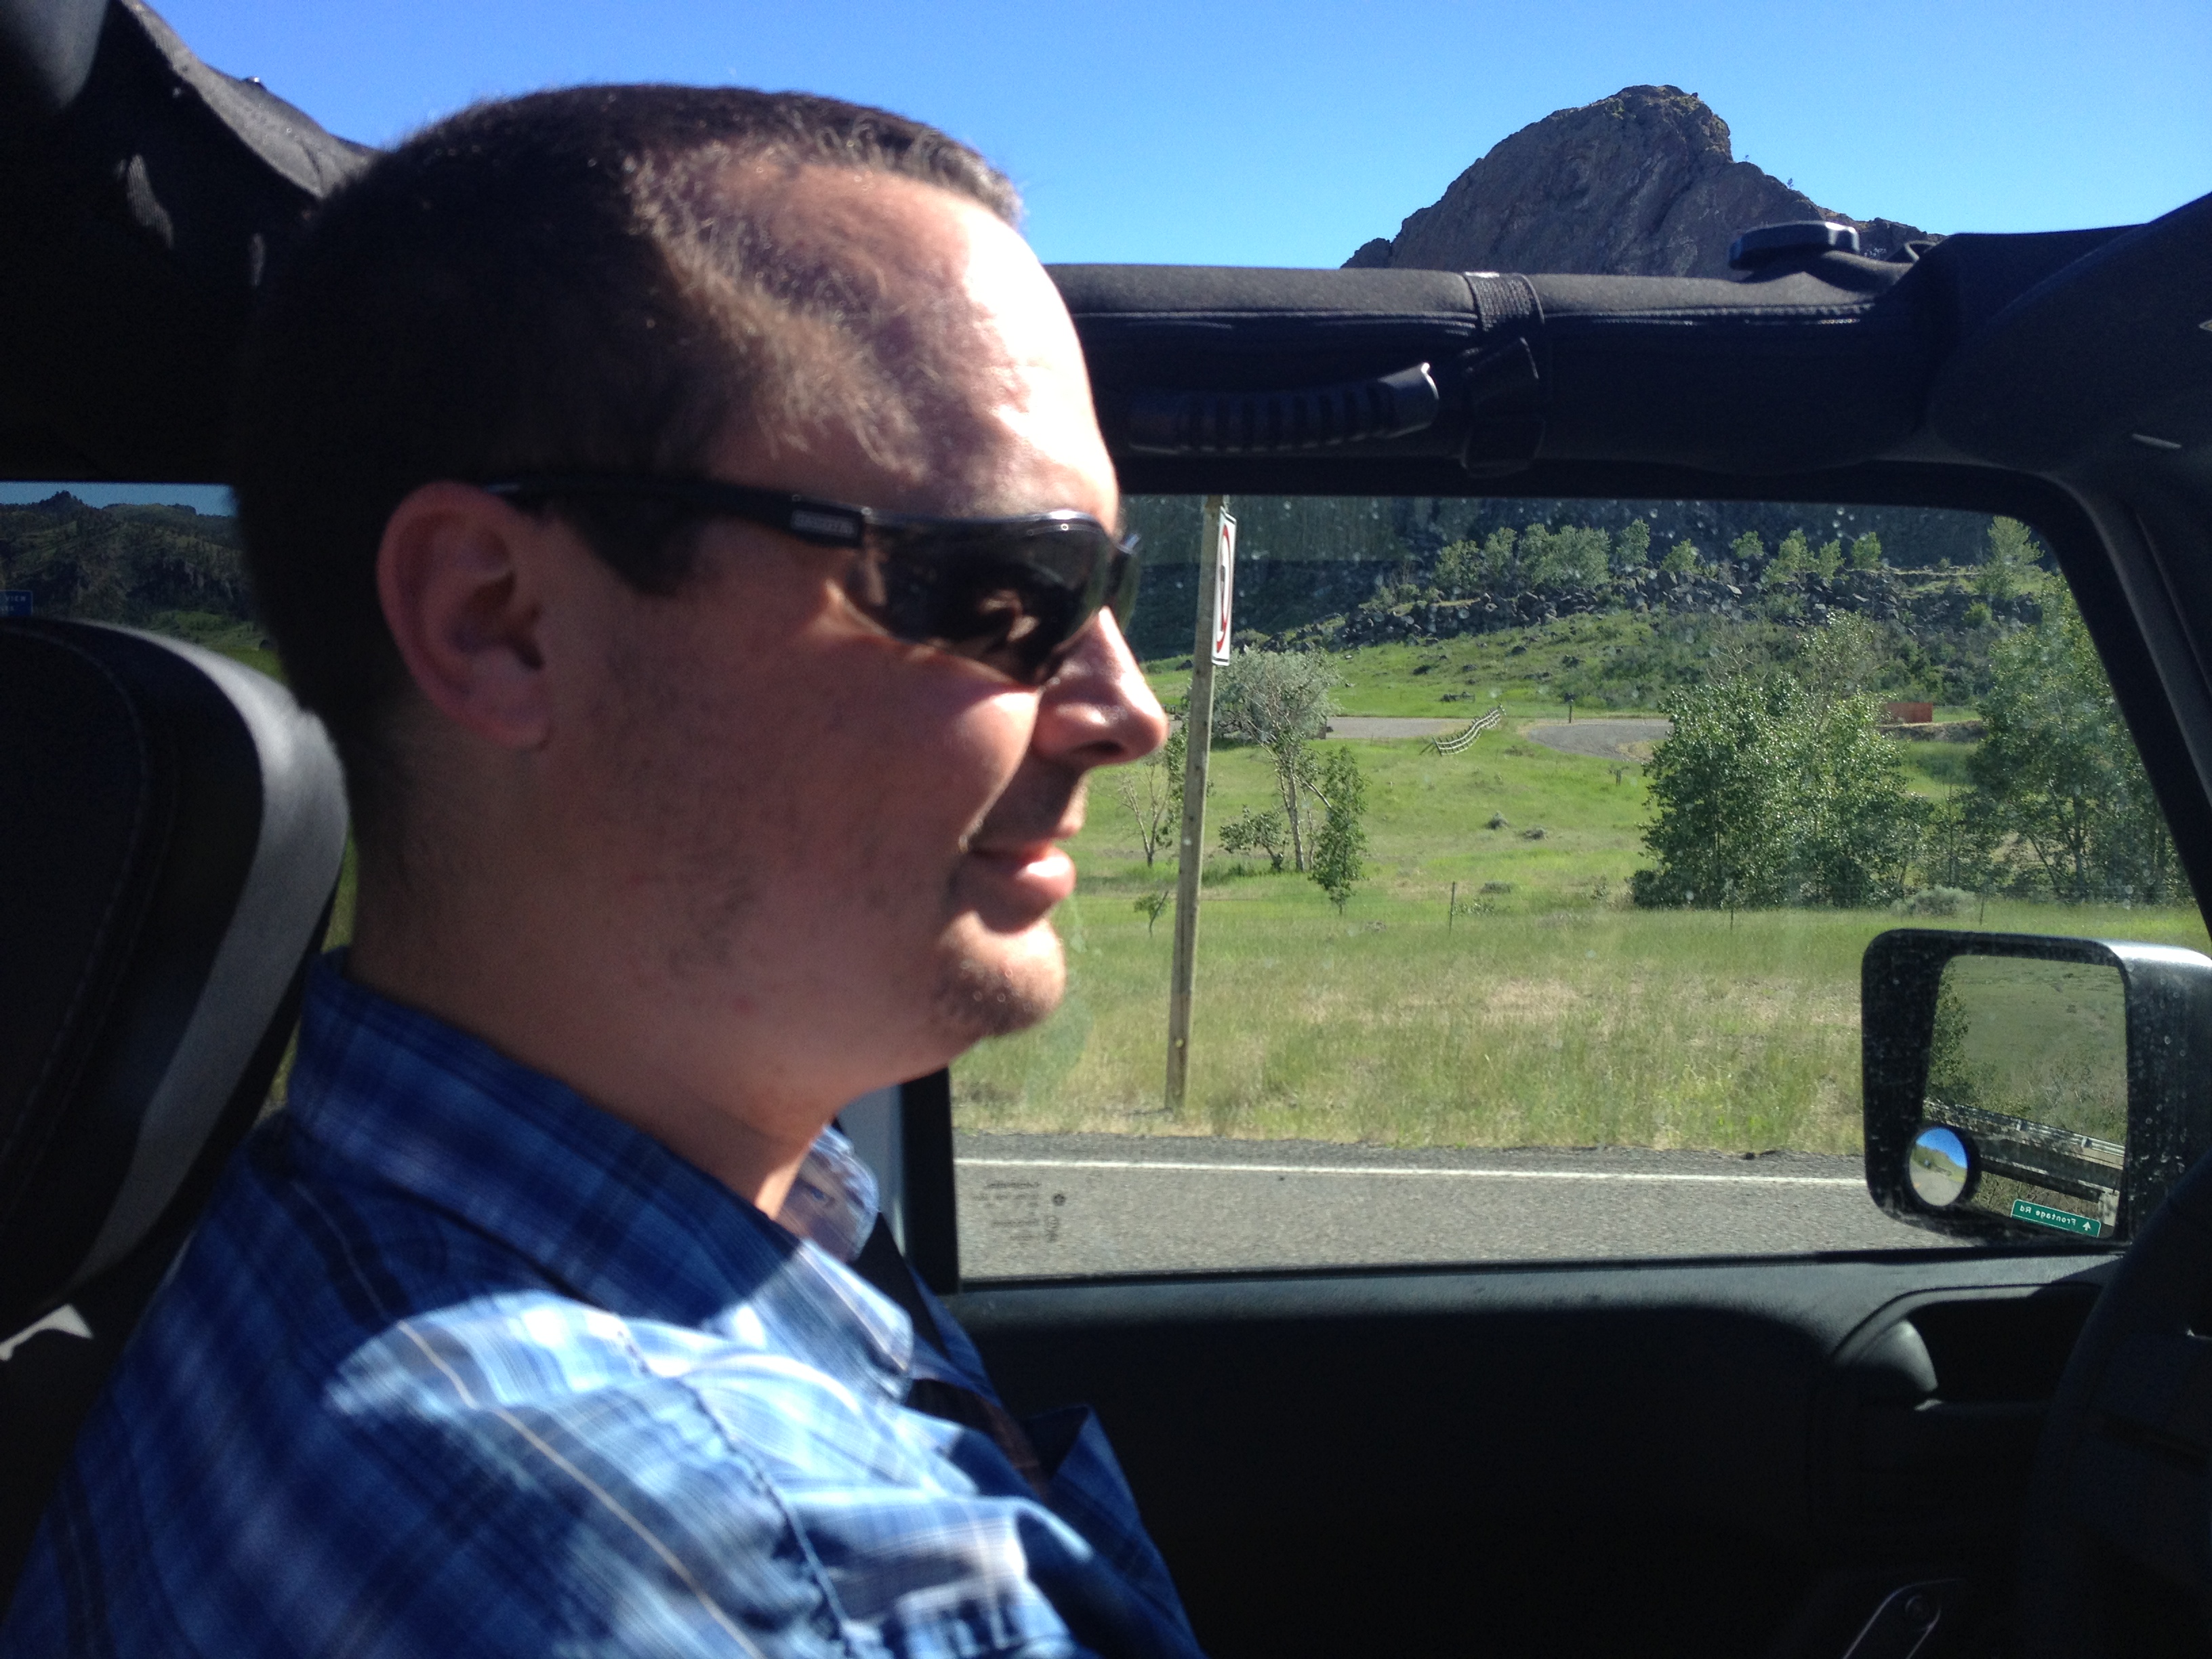 C S Martin driving a Jeep in Cascade, Montana in 2013.